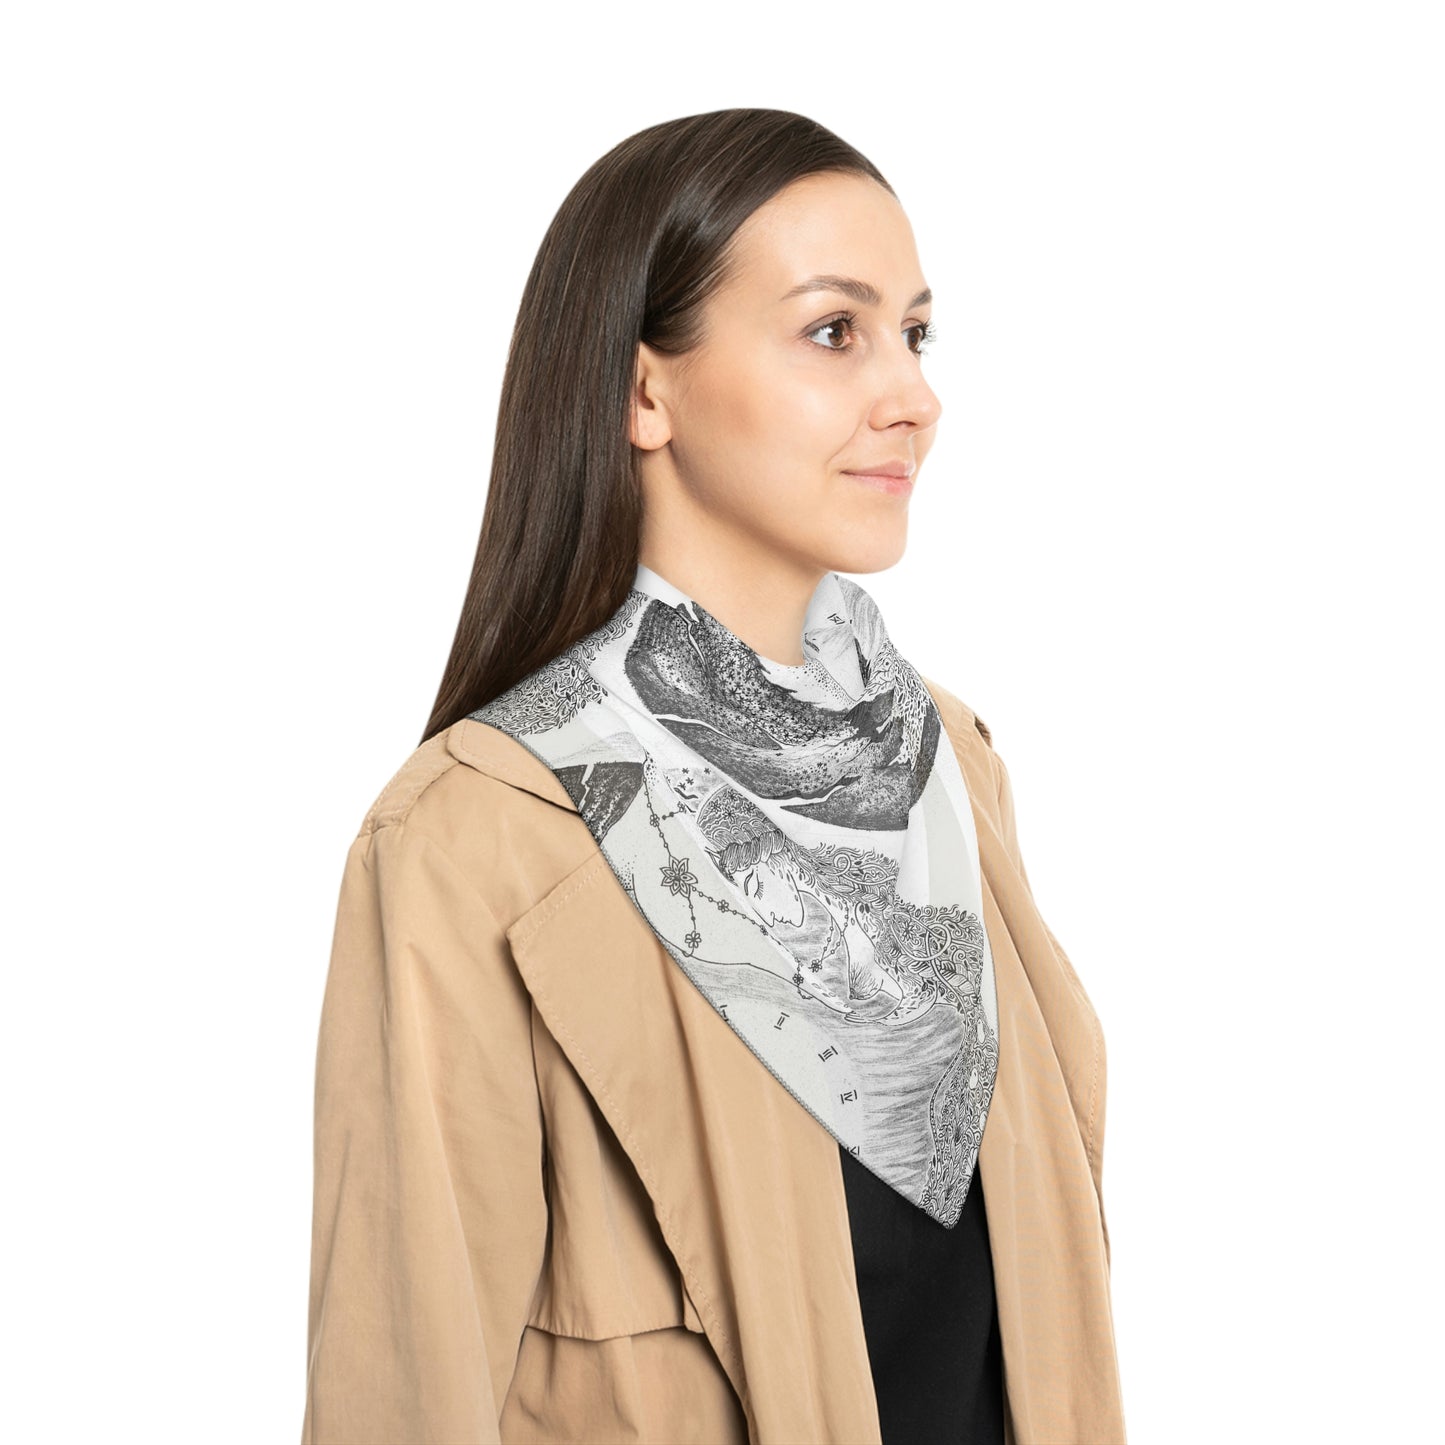 Chinese Years Zodiac Sign Poly Scarf (Horse) White